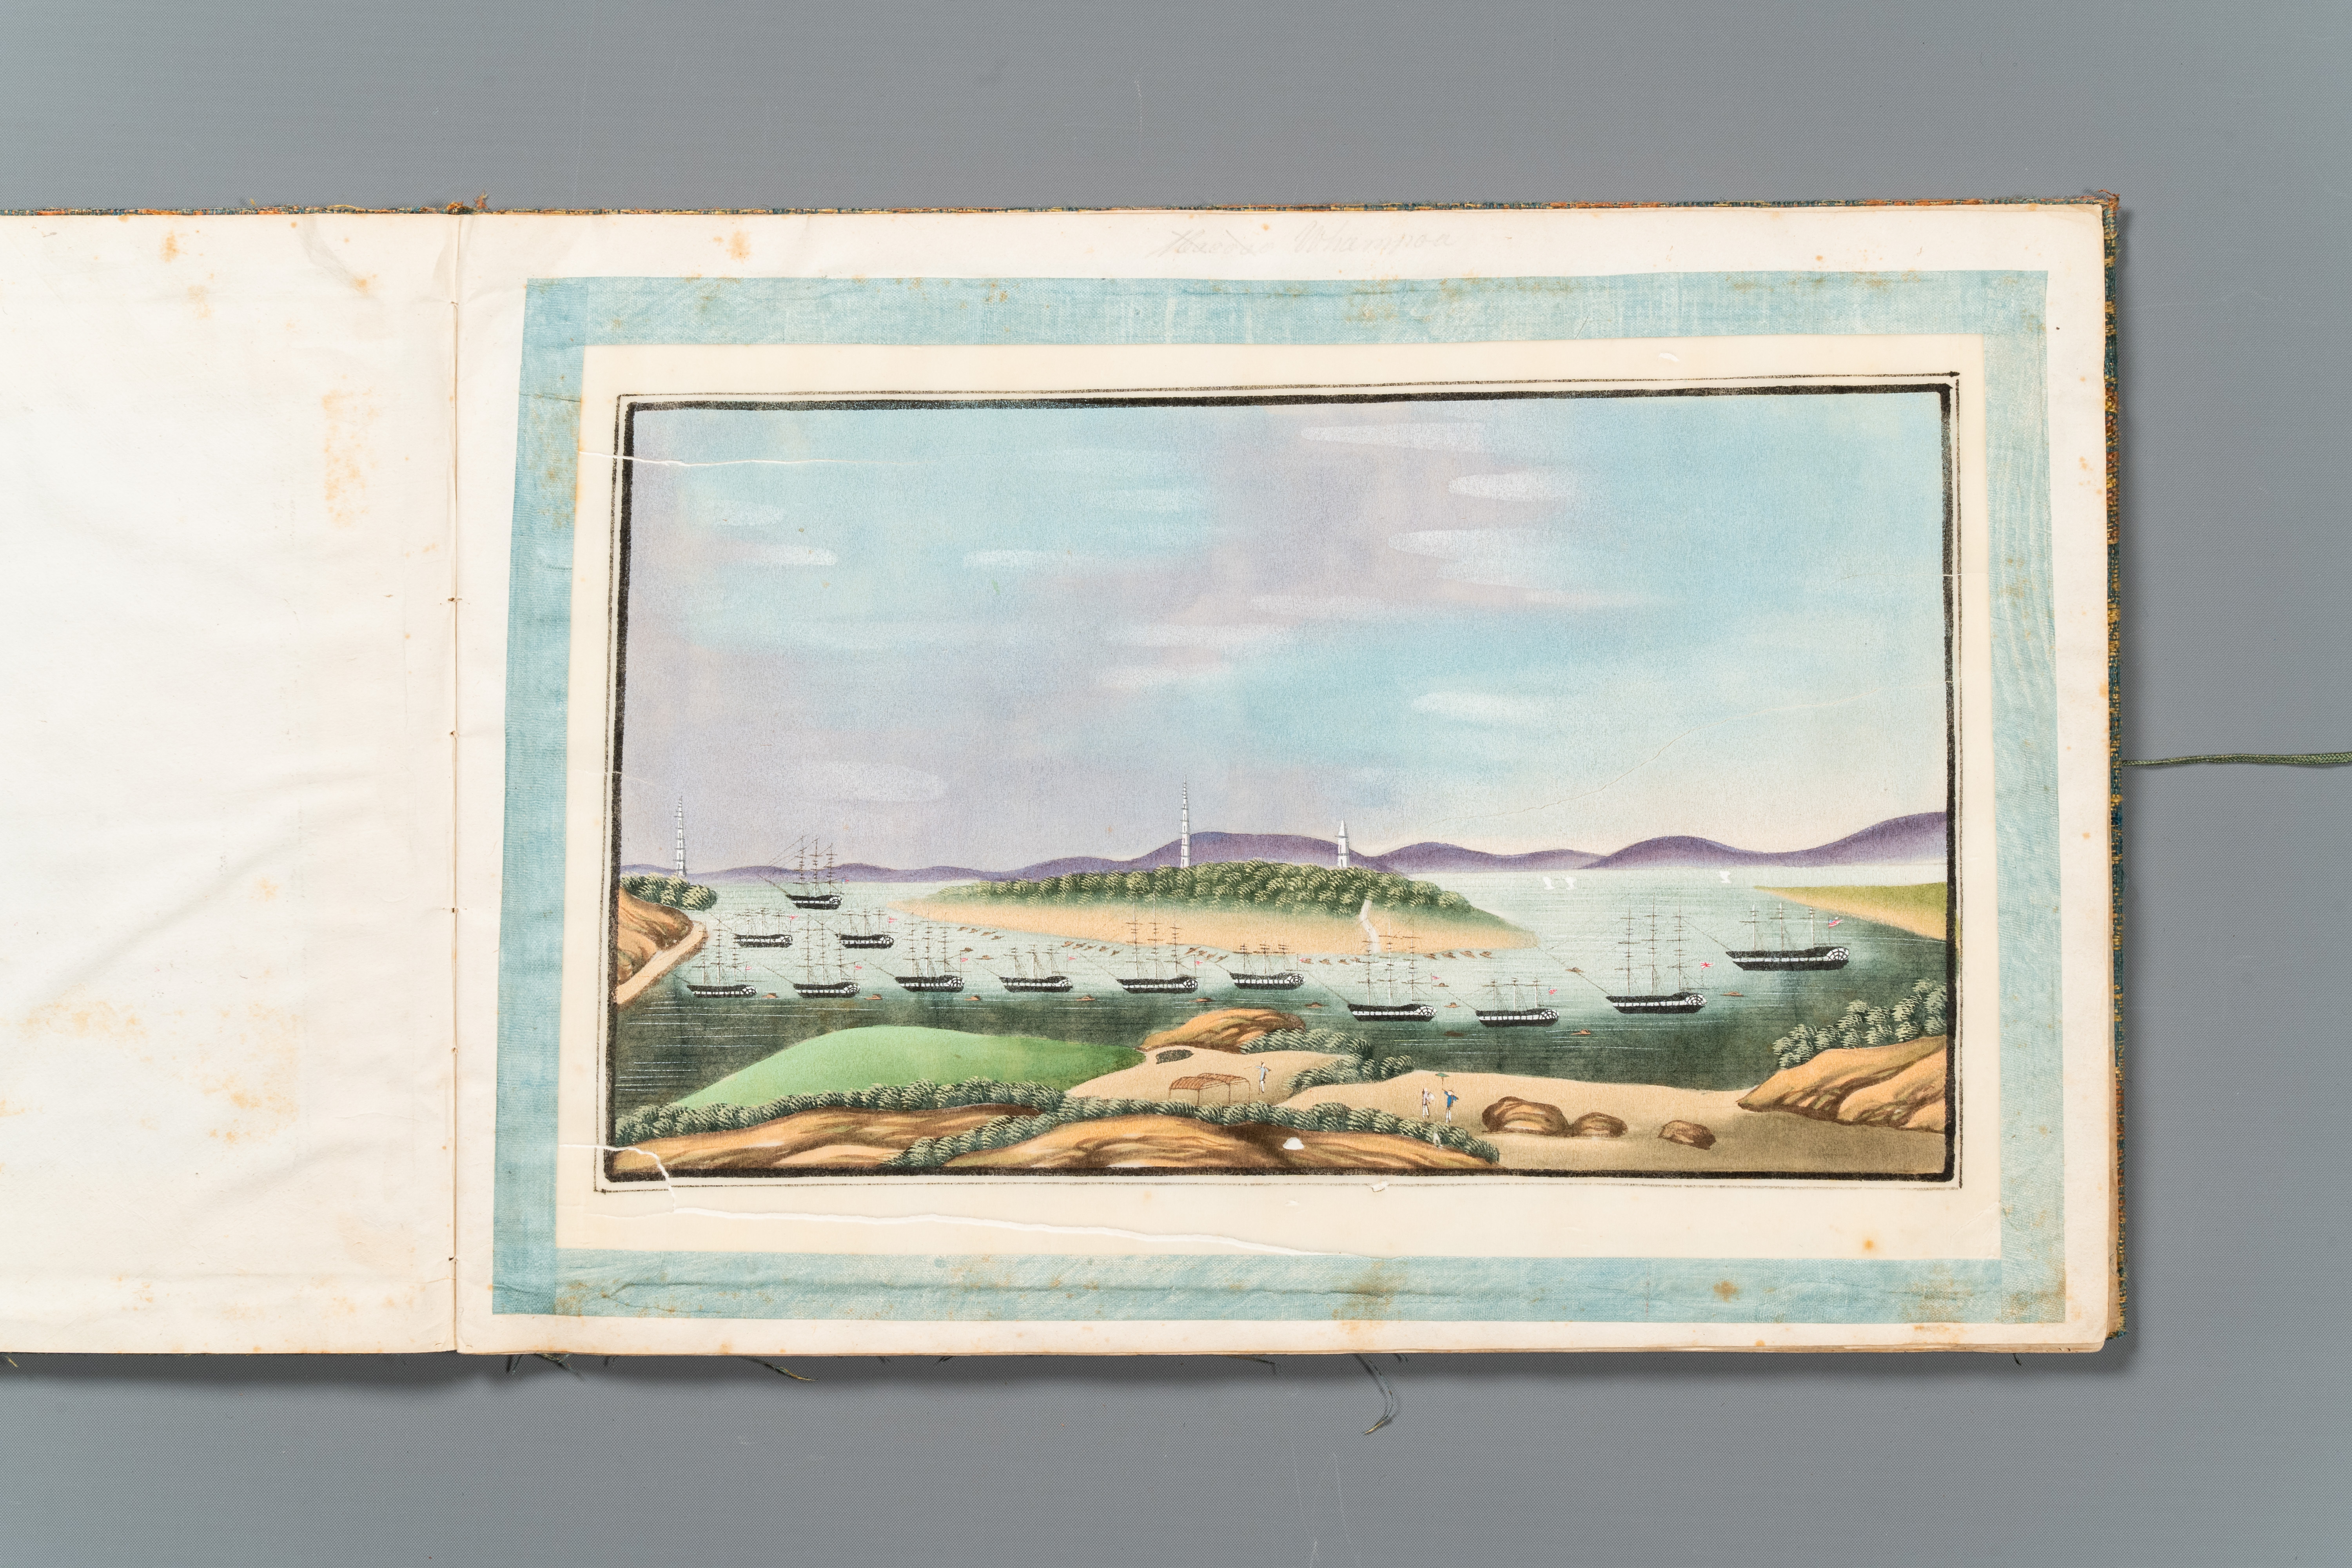 A rare album with Chinese rice paper paintings of 'Hong' views, figures and ships, Canton, Foekhing - Image 2 of 14